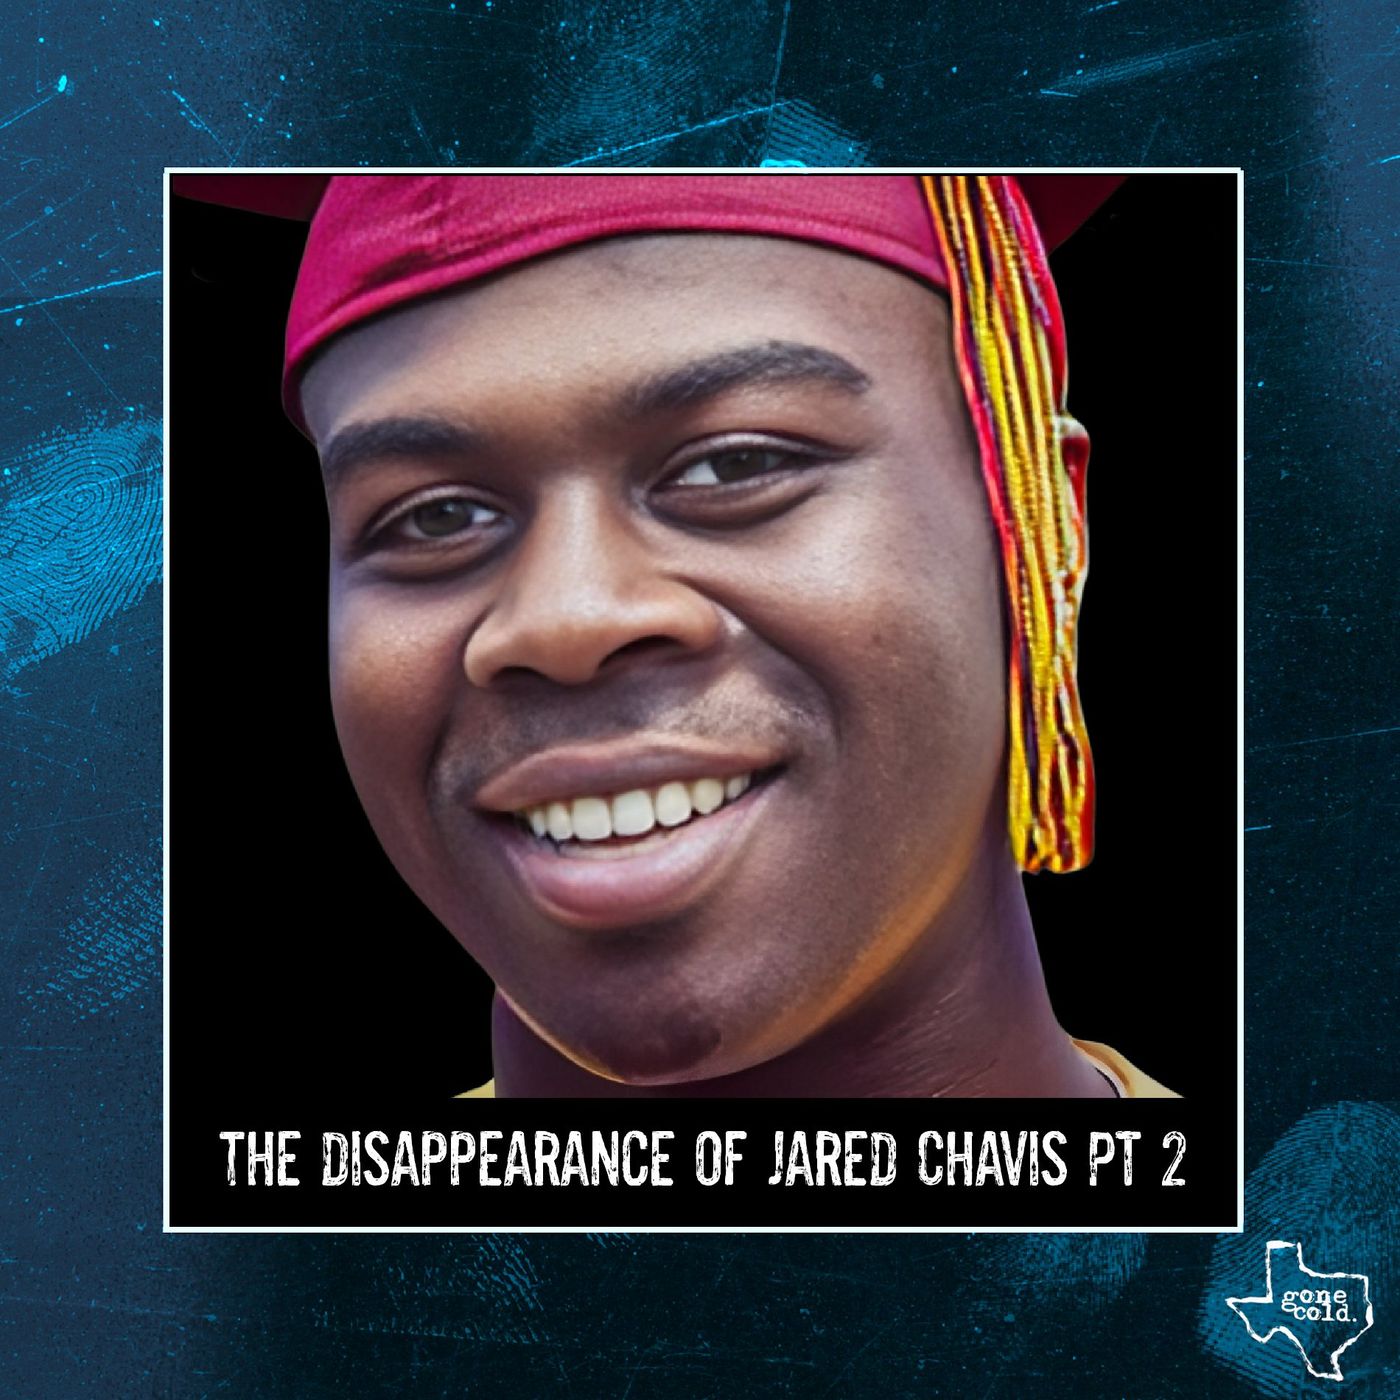 The Disappearance of Jared Chavis Part 2